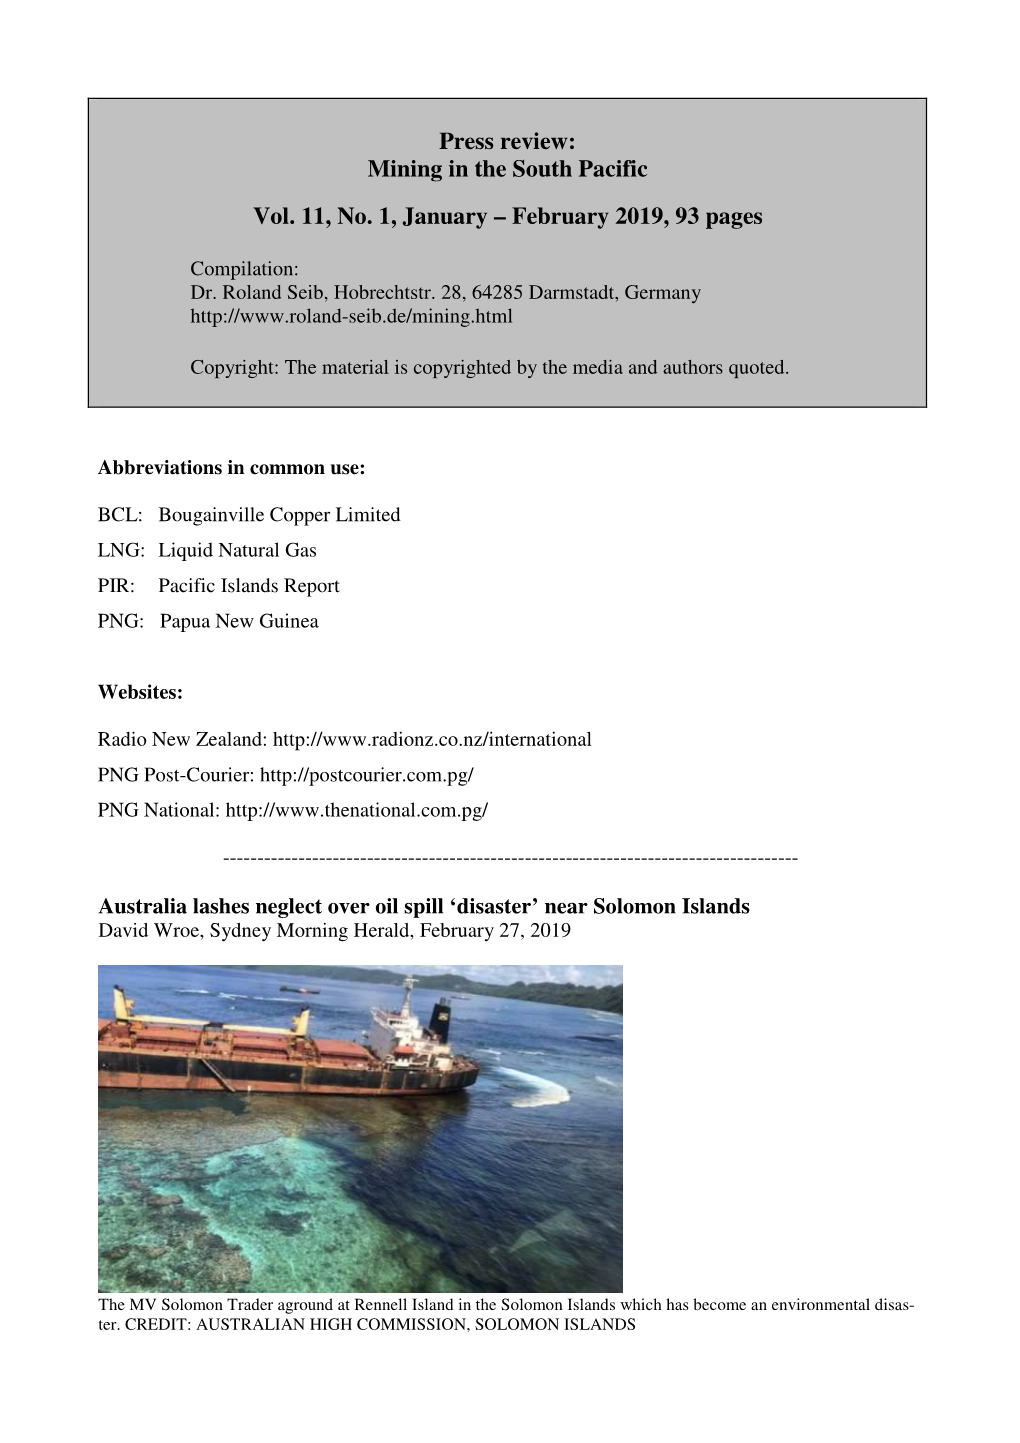 Mining in the South Pacific Vol. 11, No. 1, January – February 2019, 93